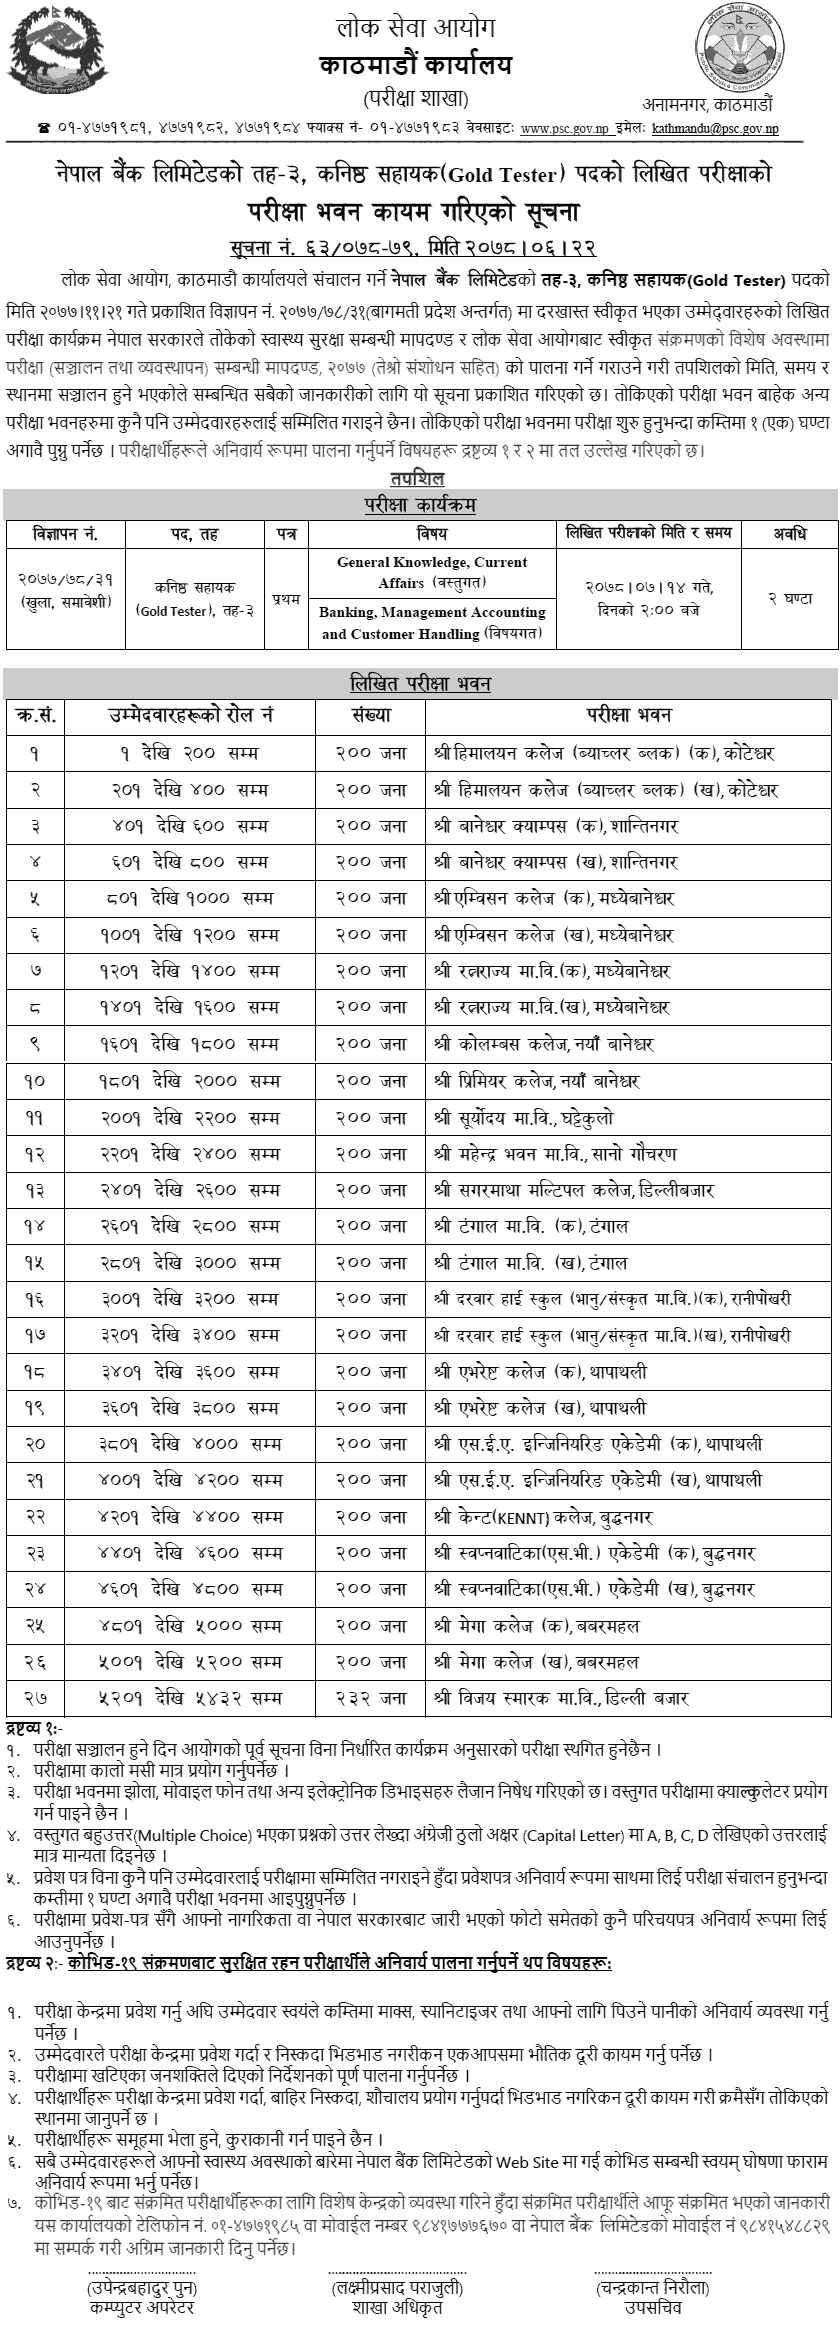 Nepal Bank Limited Assistant 4th and Gold Tester 3rd Level Written Exam Center Kathmandu